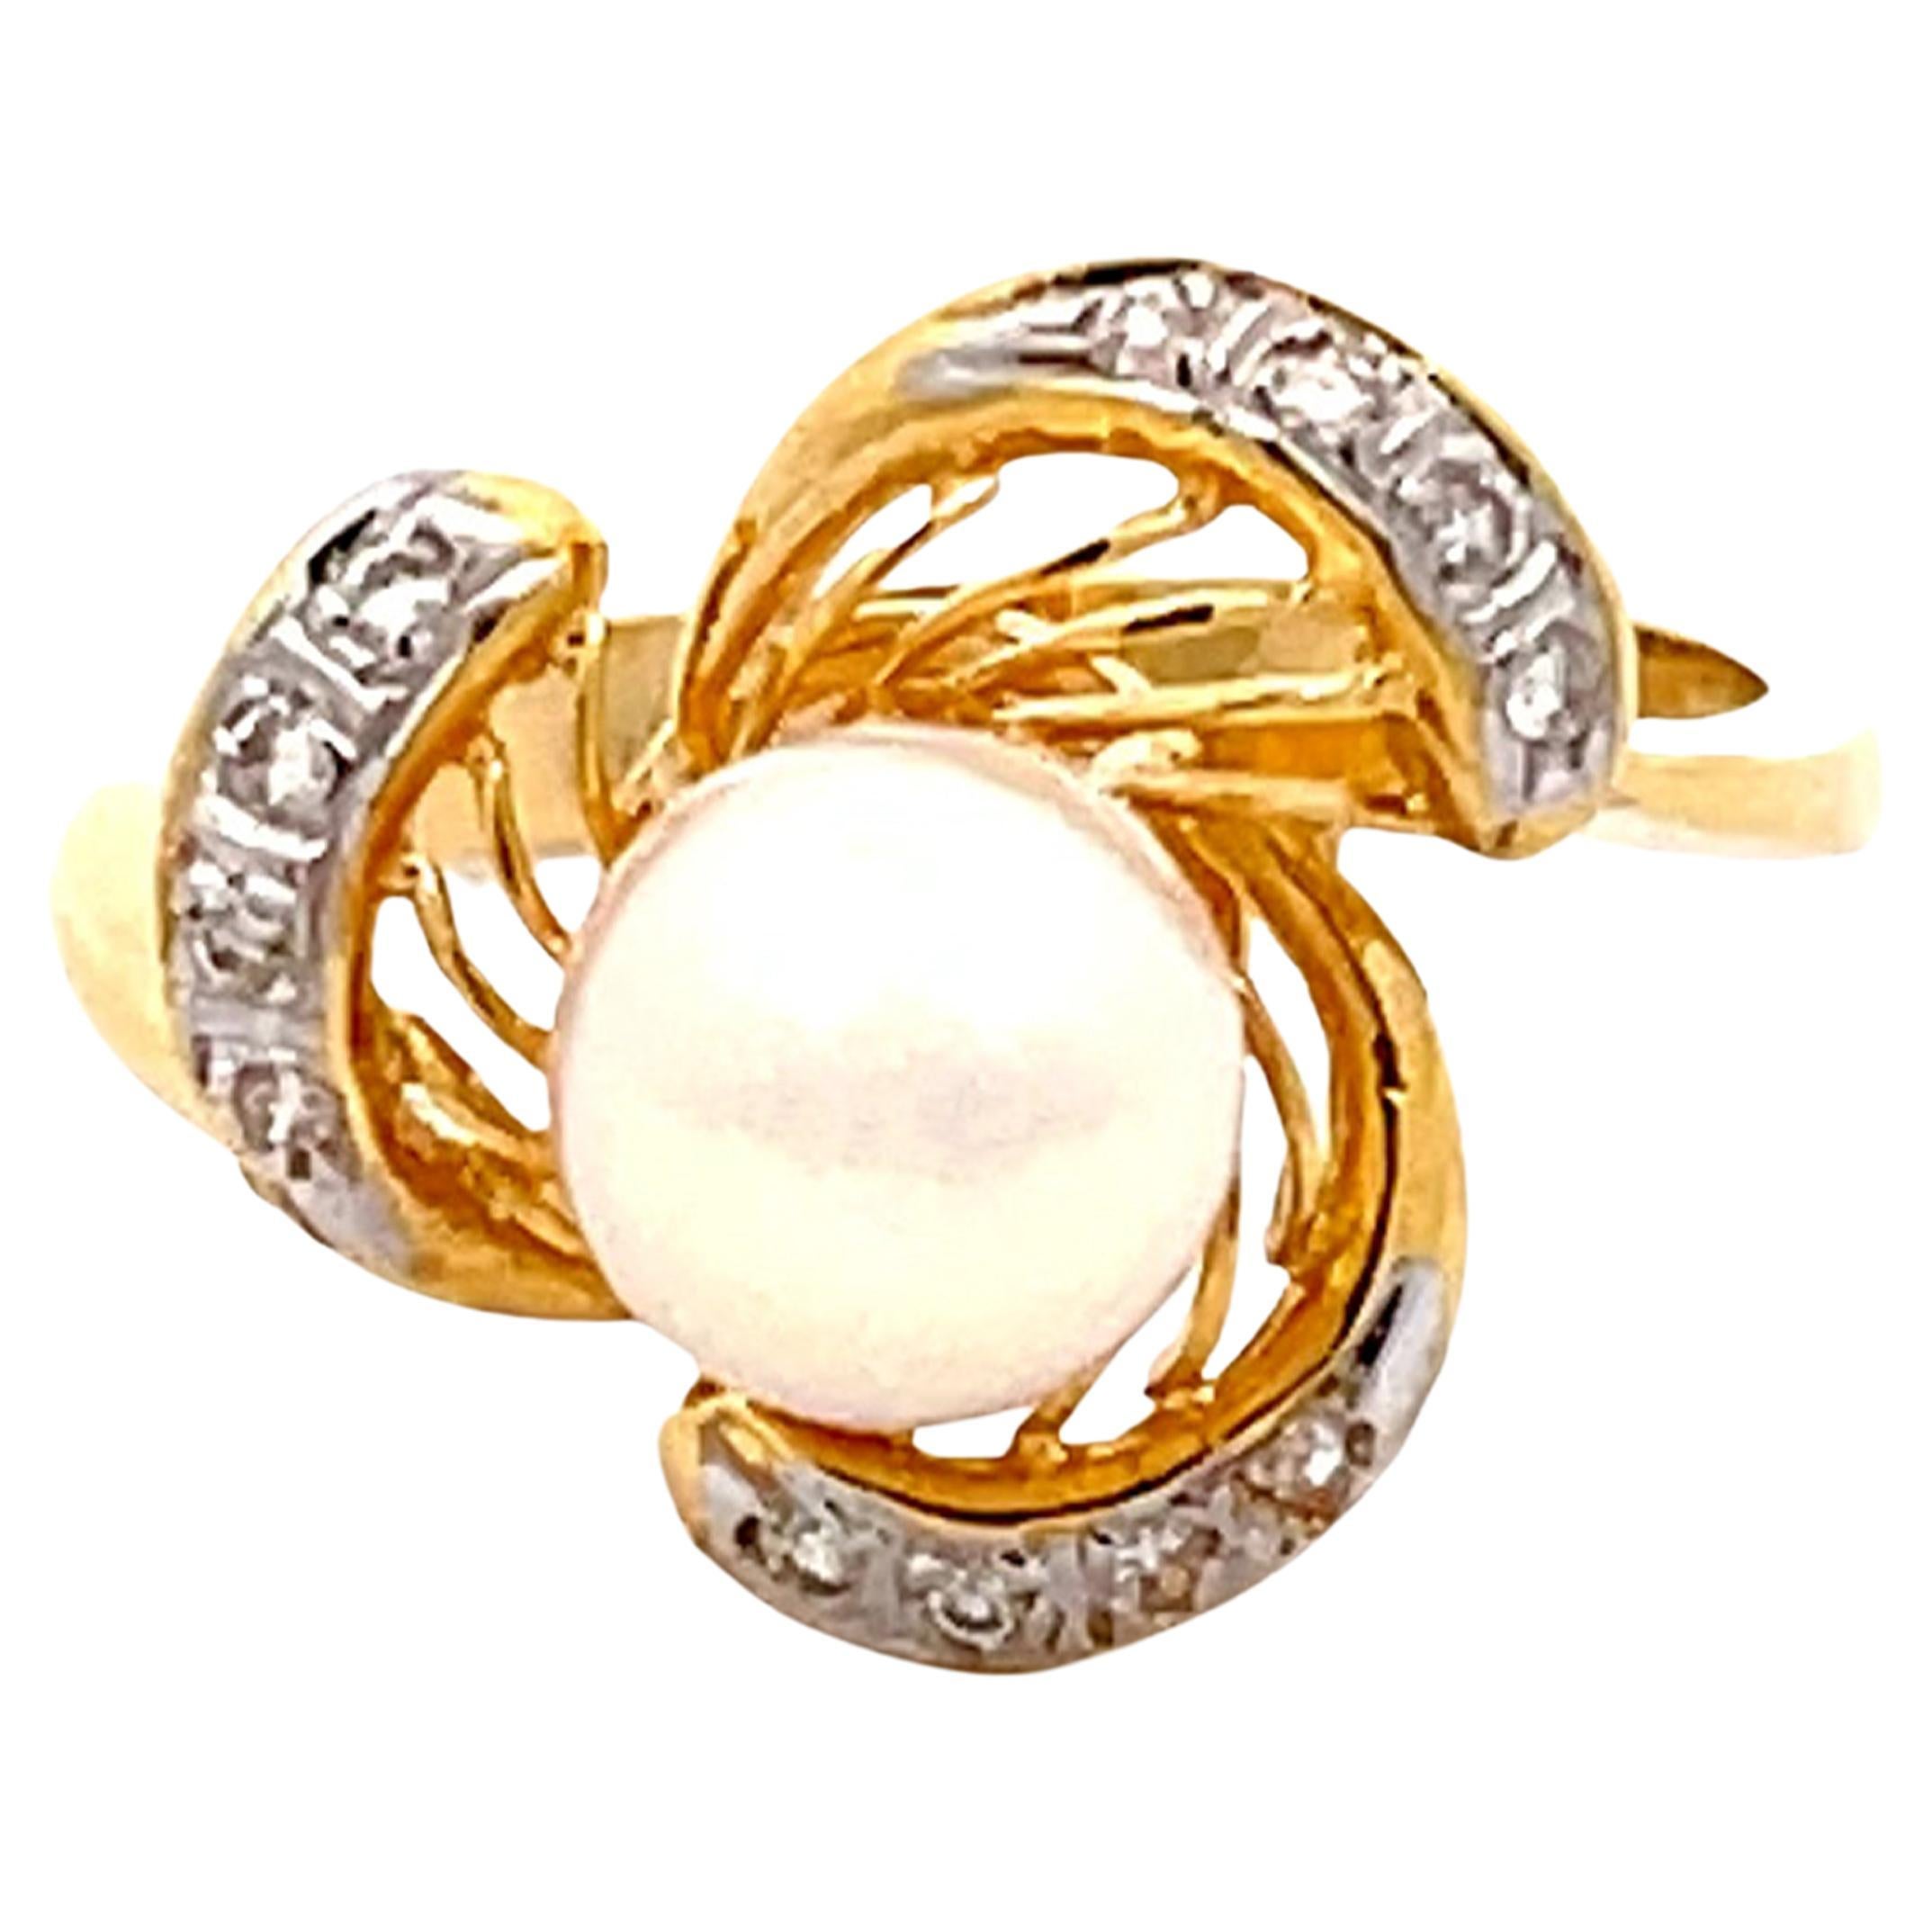 White Pearl and Diamond Flower Ring in 18K Yellow Gold